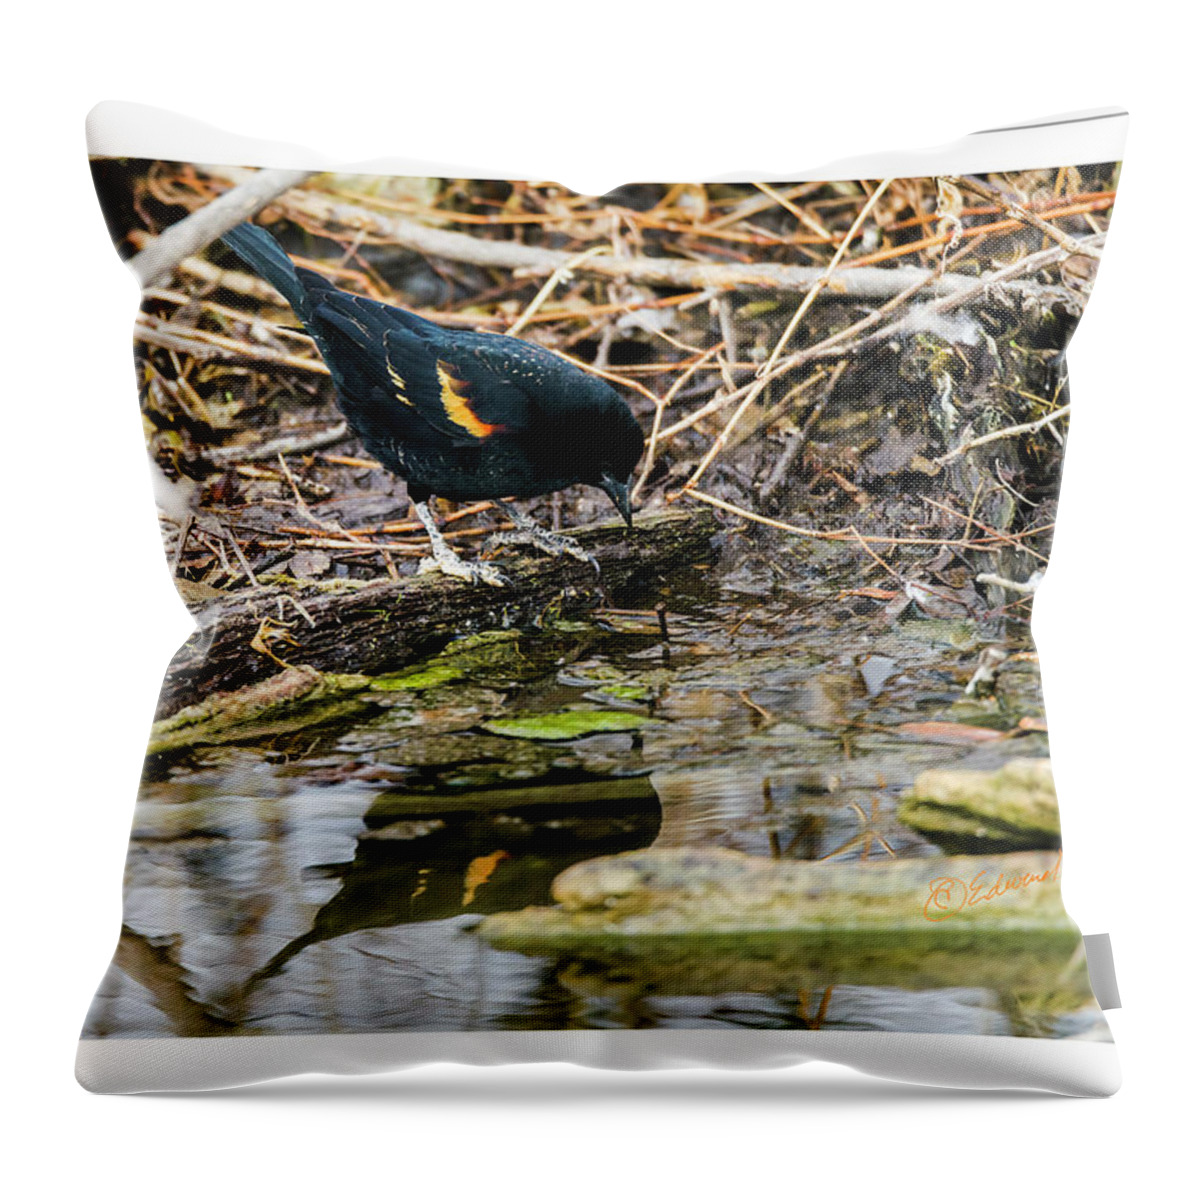 Heron Haven Throw Pillow featuring the photograph Red-winged Black Bird At The Water's Edge by Ed Peterson